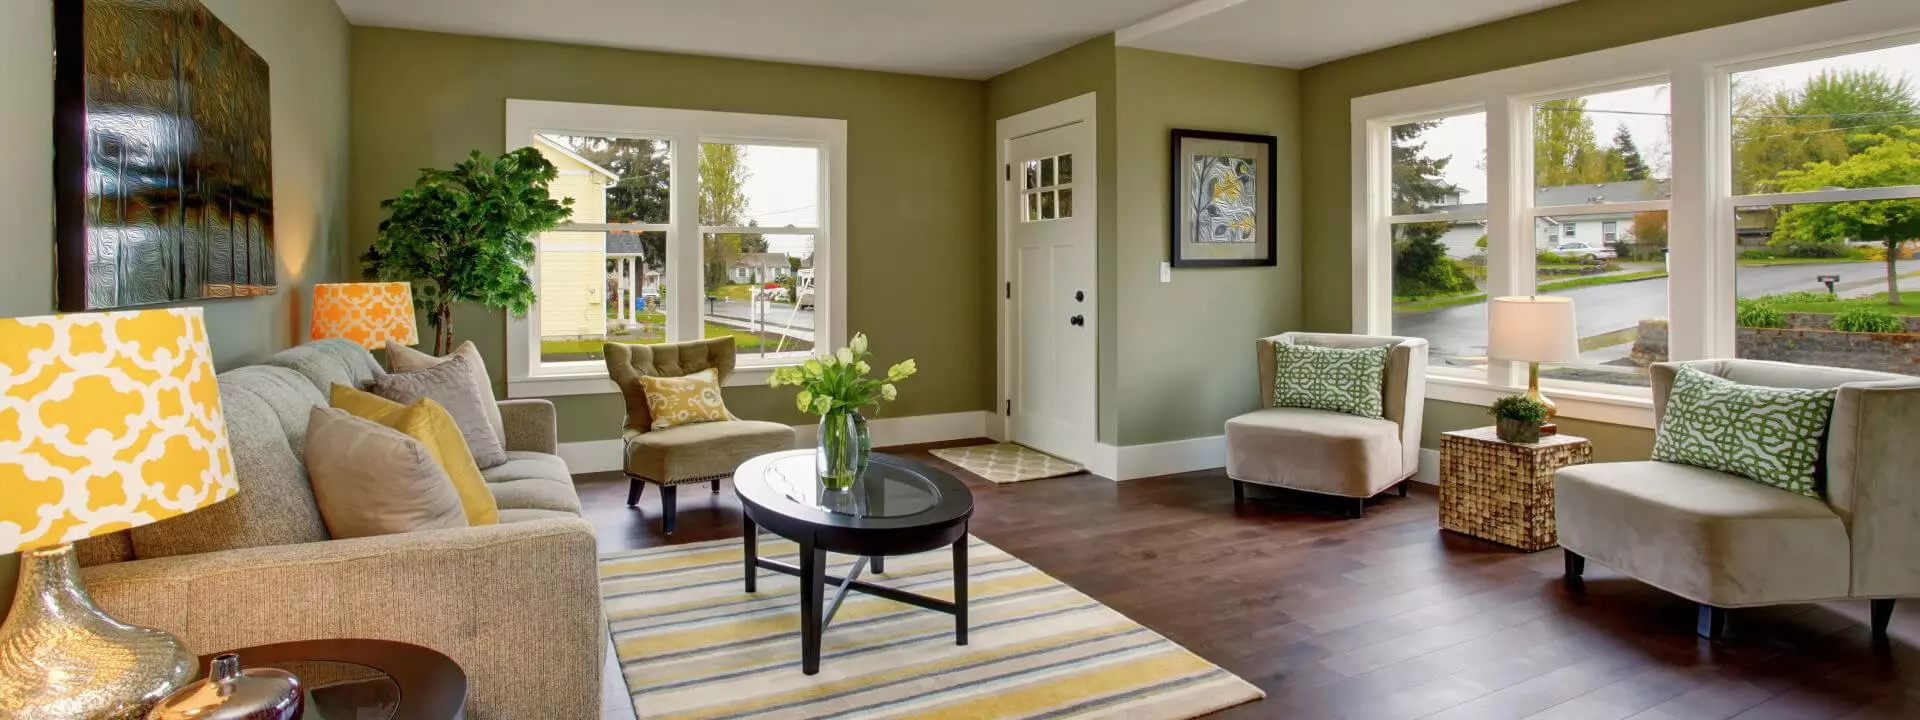 Living room painted in earthy green color